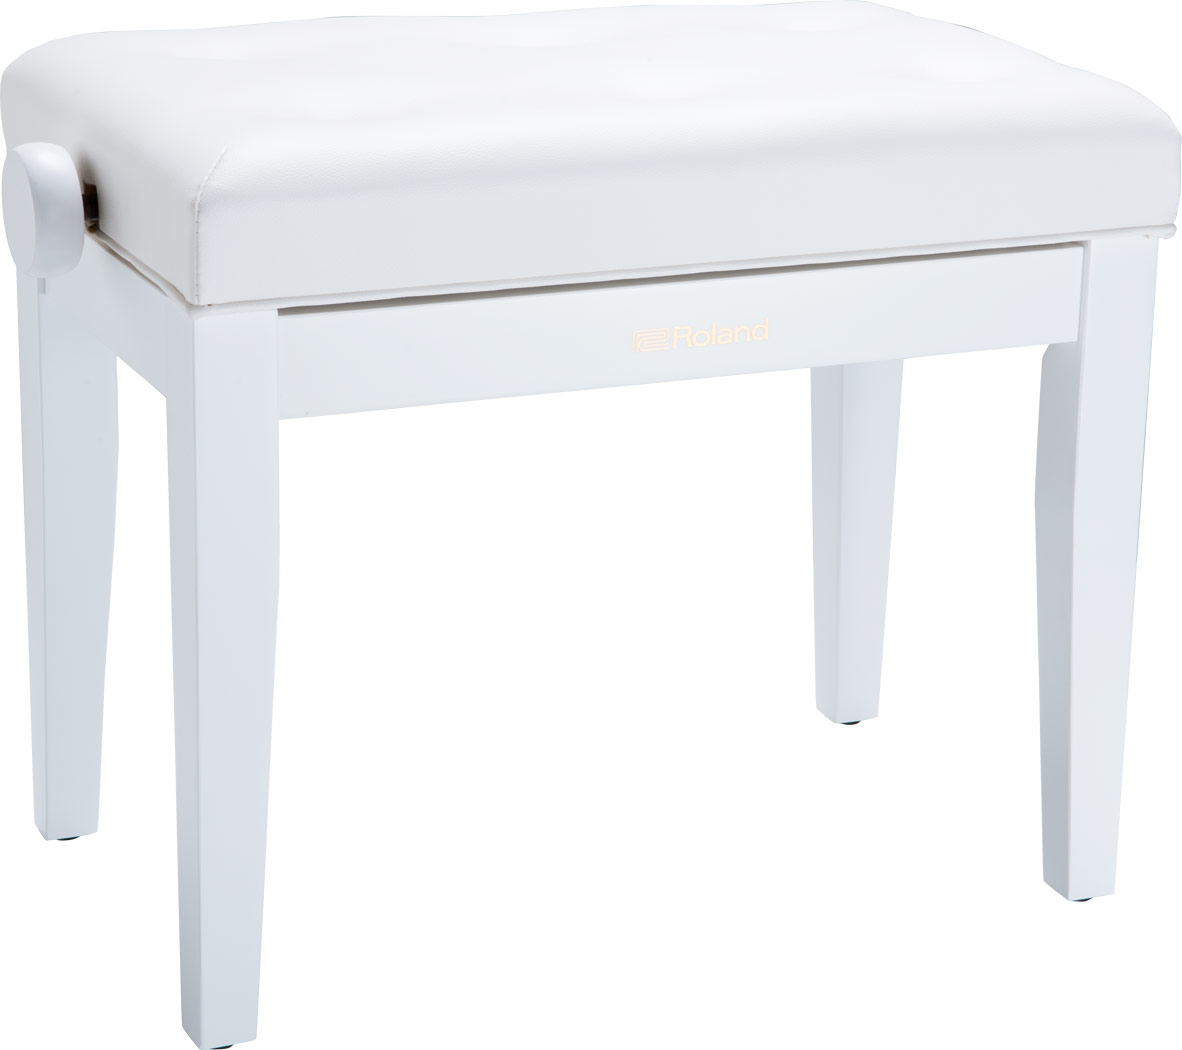 An image of Roland RPB-300 Height Adjustable Piano Bench Satin White | PMT Online